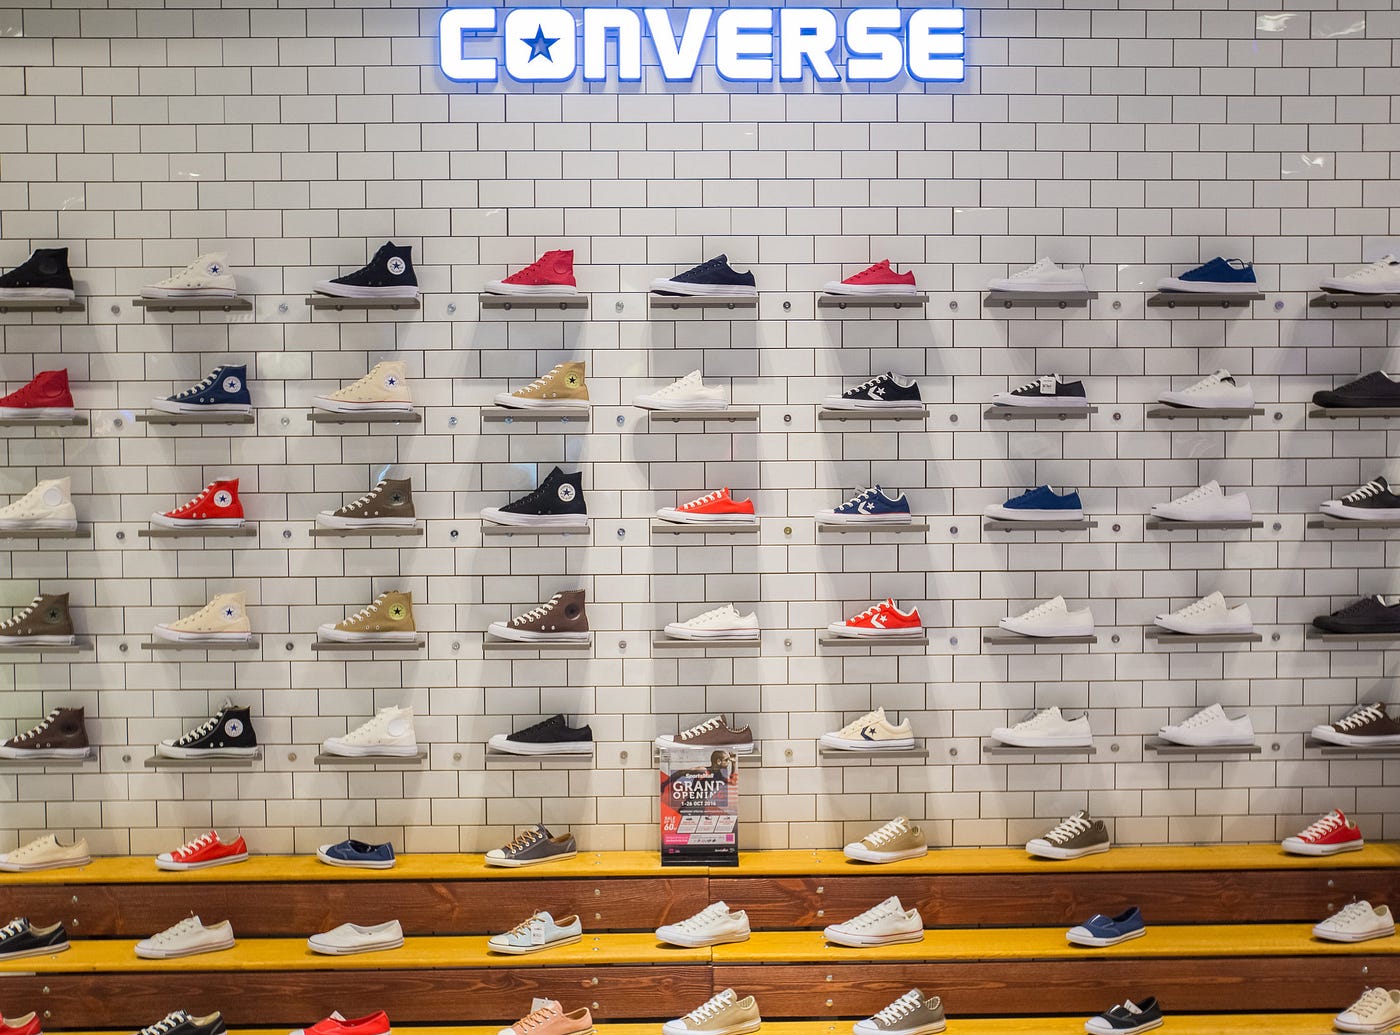 19 Insider Tips for Saving Money on Converse Shoes | by Koopy | Medium